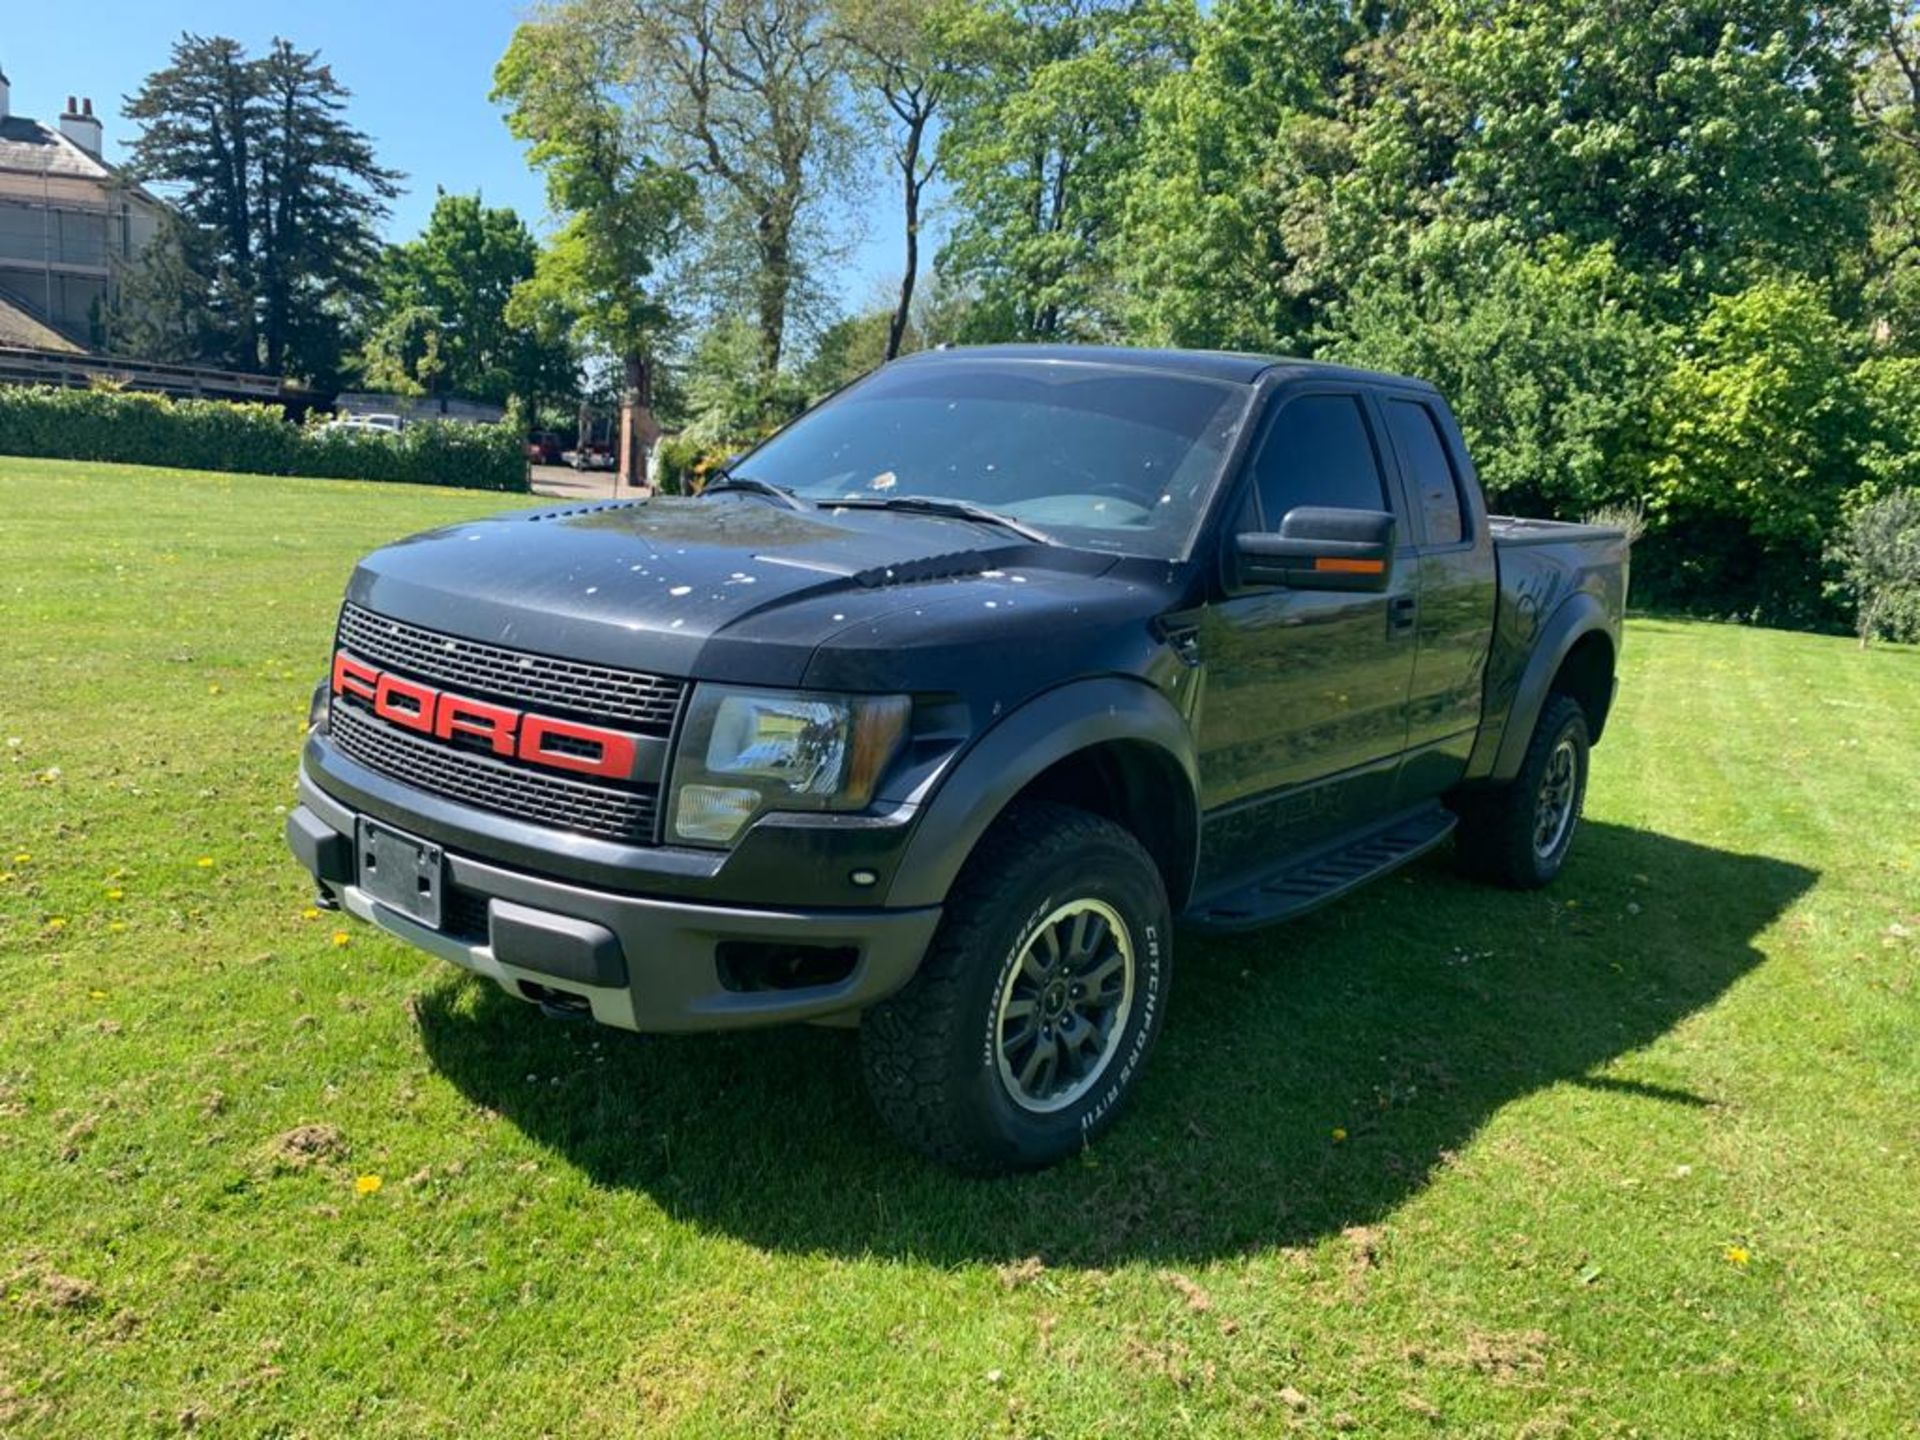 2012 FORD F-150 RAPTOR - 65,000 MILES, LOTS OF UPGRADED PARTS, READY IN UK WITH NOVA APPLICATION - Image 7 of 18